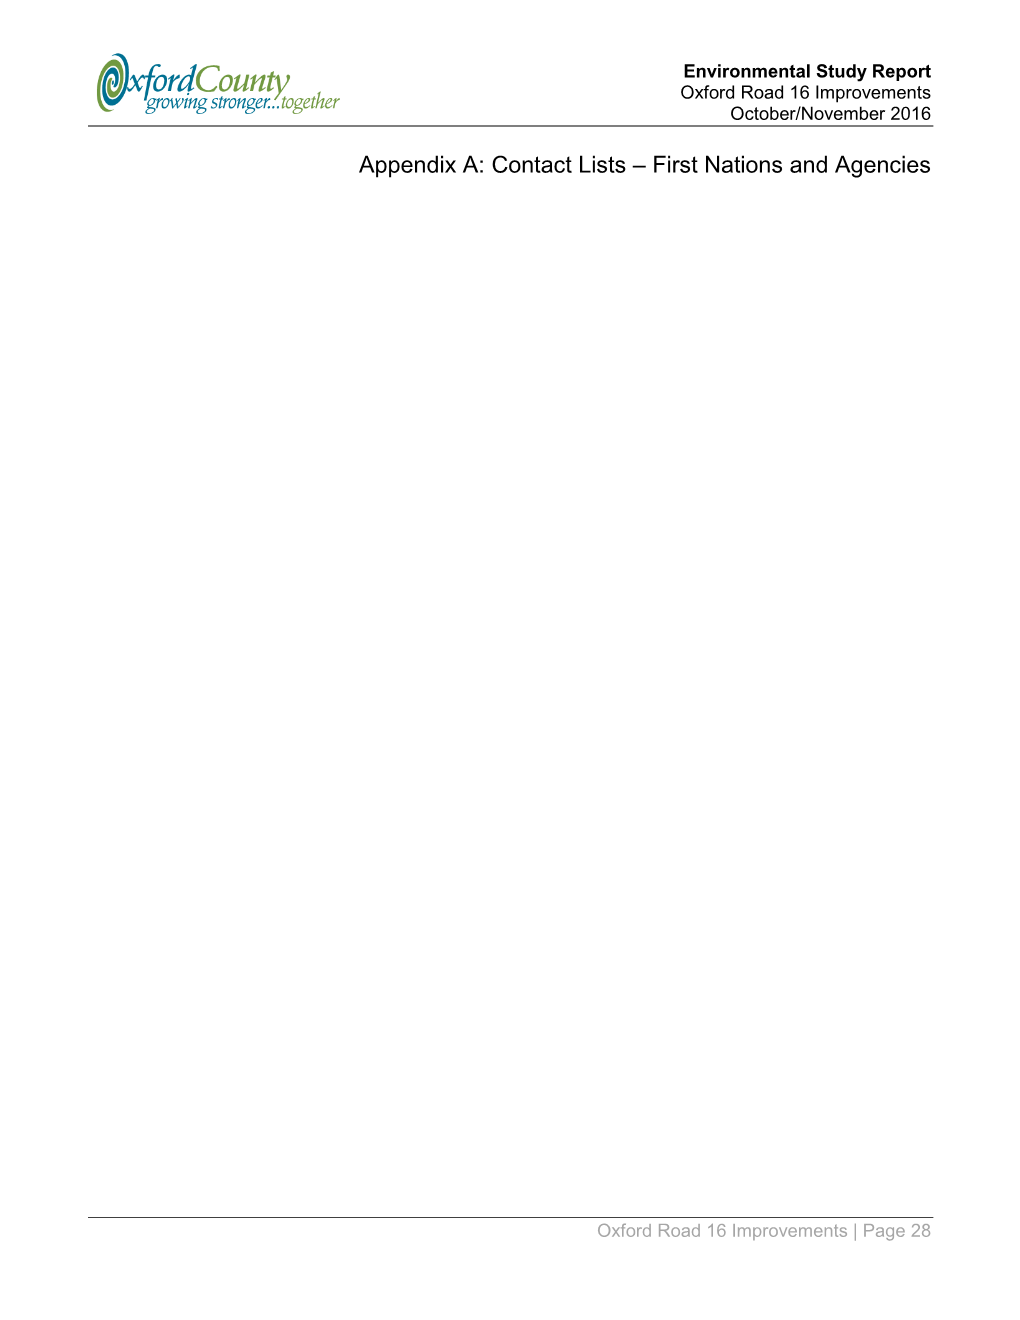 Appendix A: Contact Lists – First Nations and Agencies